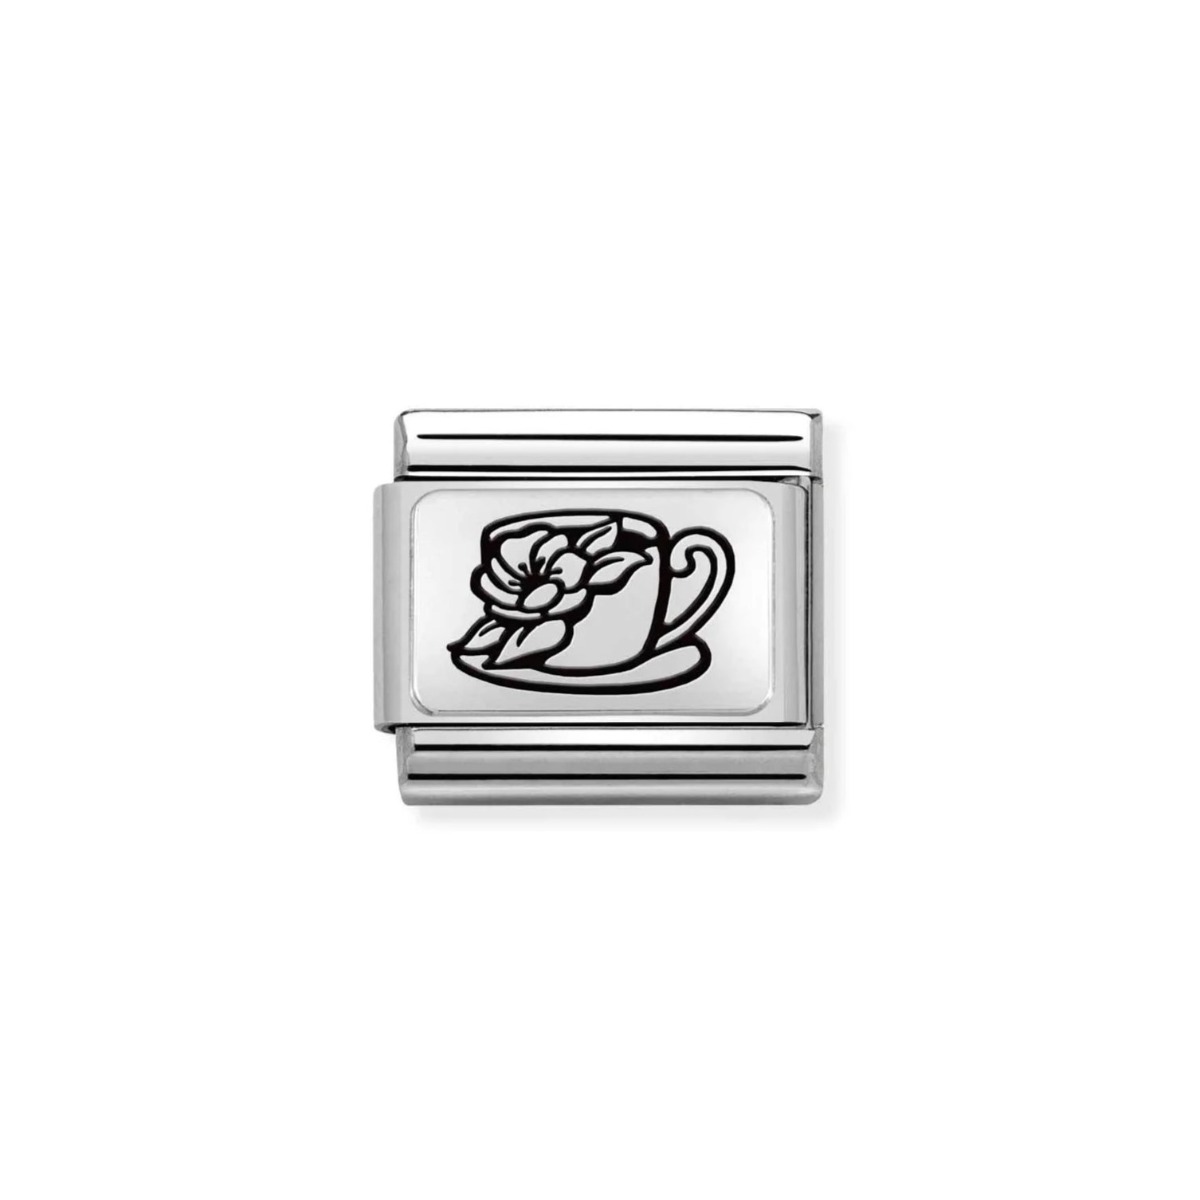 Nomination Classic Flowers Charm - Sterling Silver and Black Enamel Cup